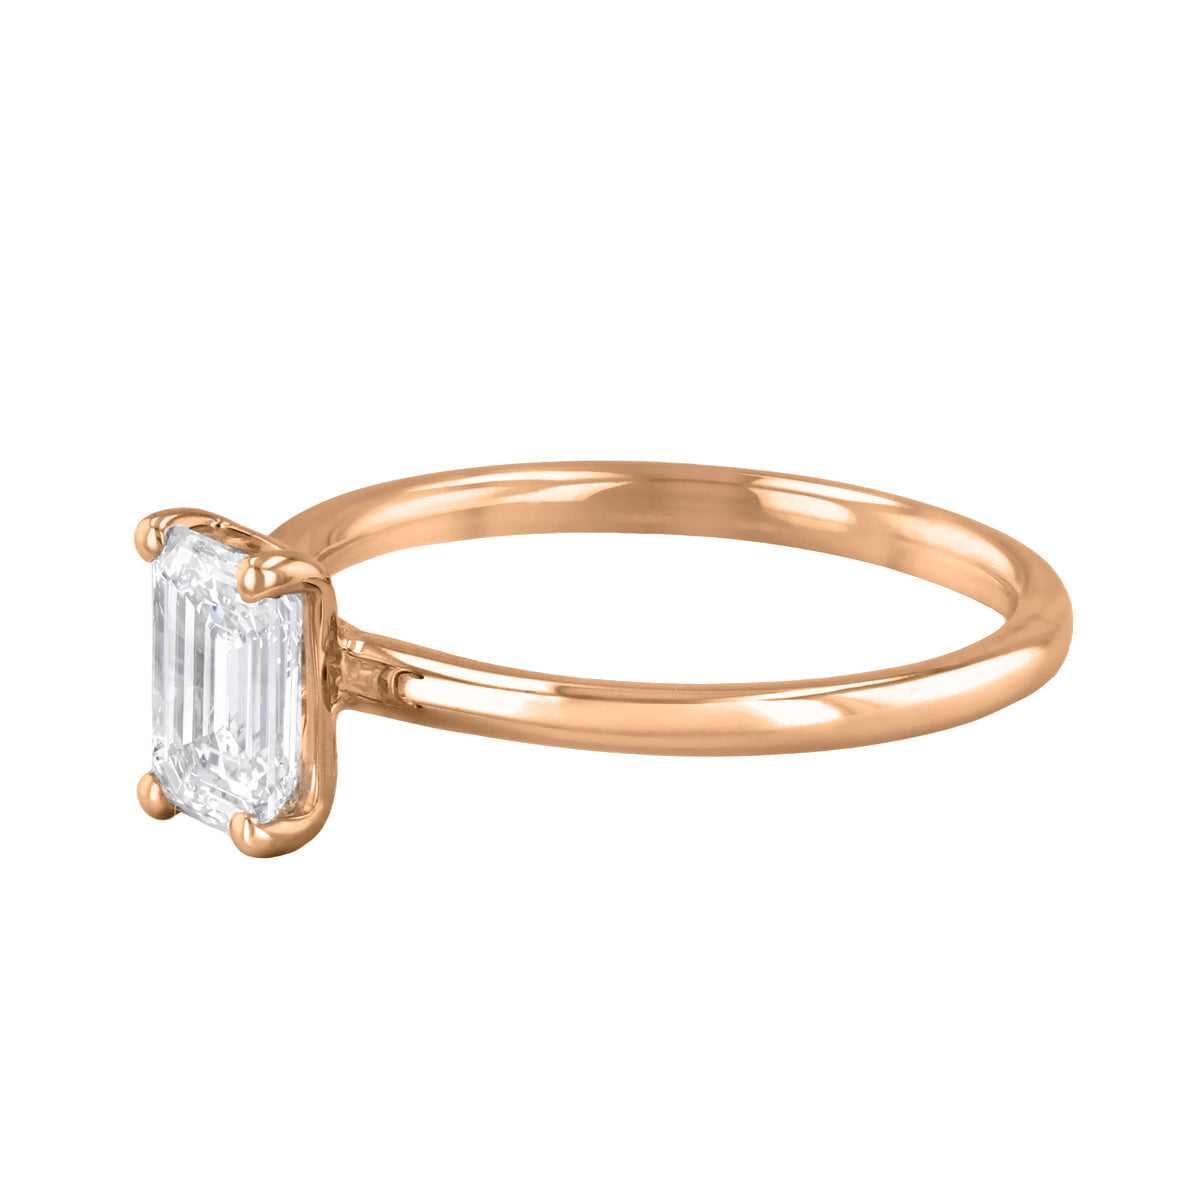 0-25ct-sofia-emerald-cut-solitaire-diamond-engagement-ring-18ct-rose-gold